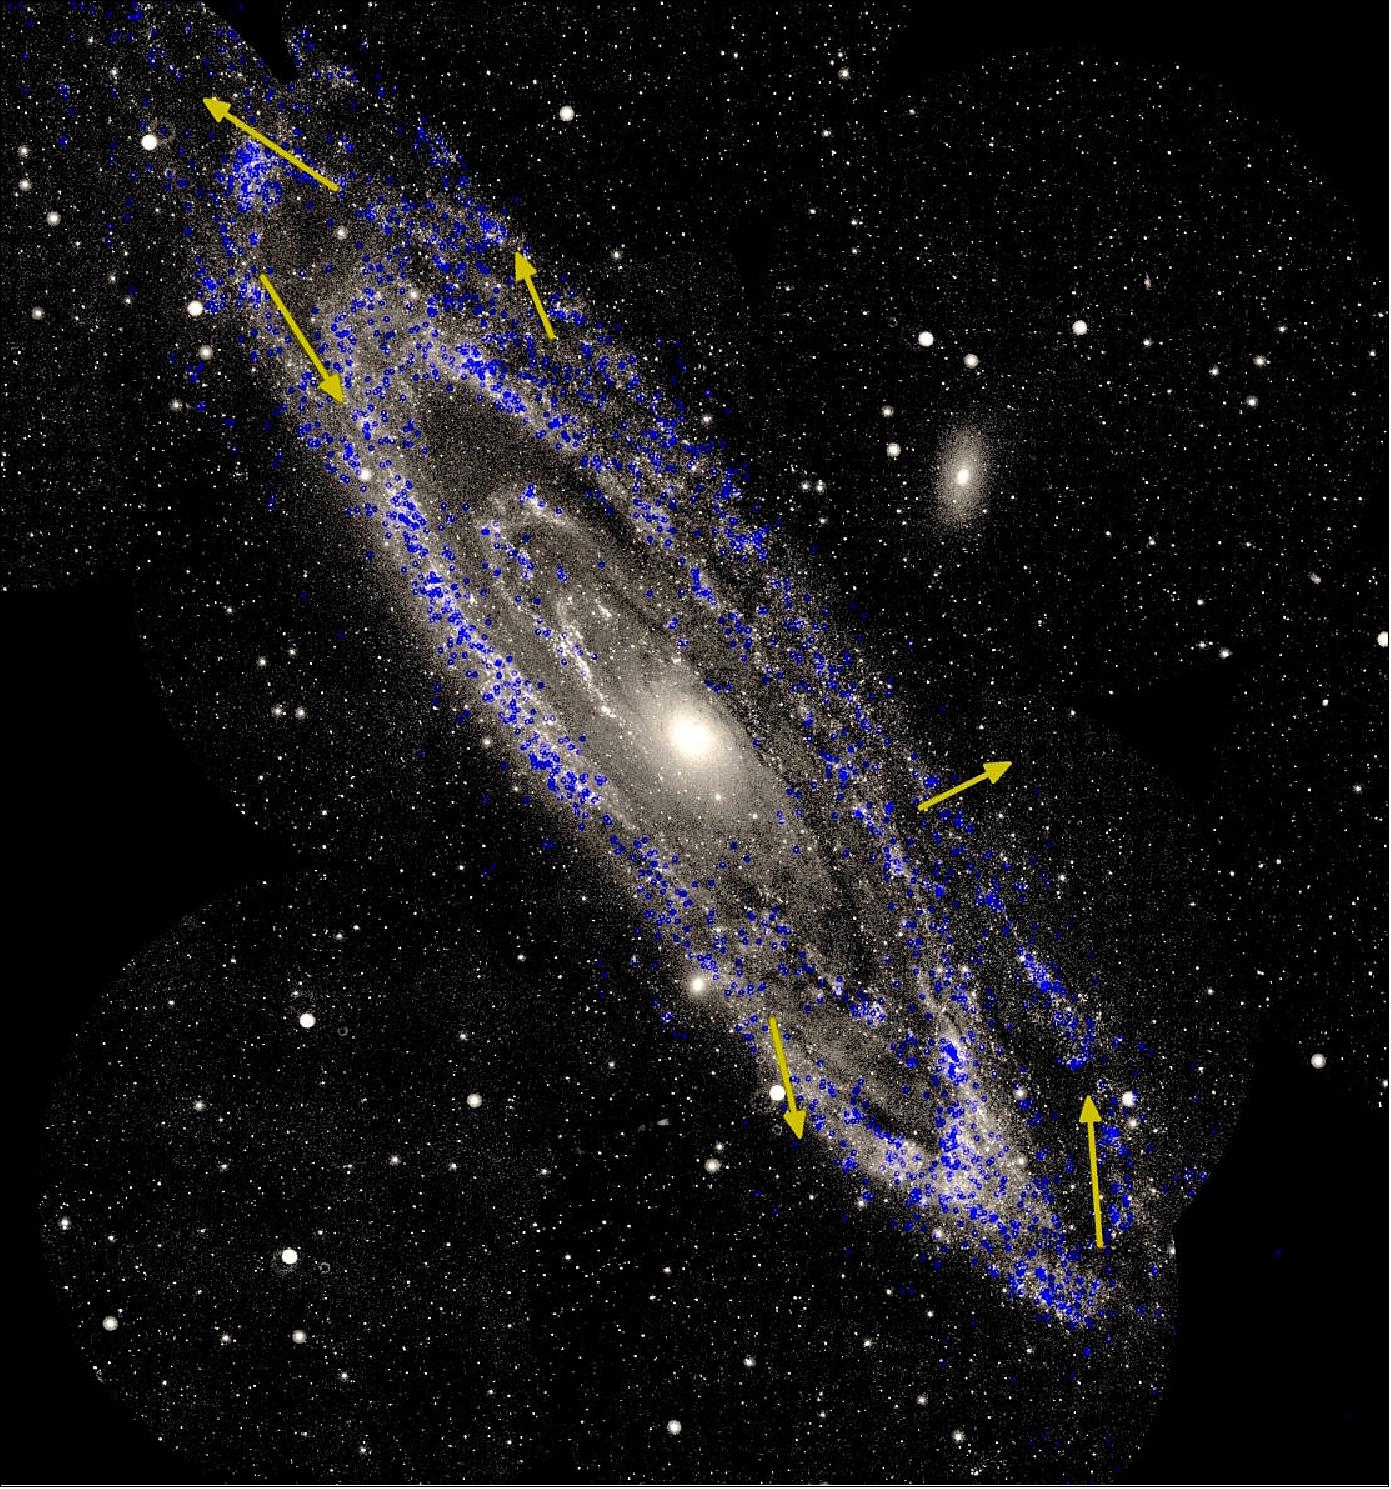 Figure 25: A view of the Andromeda galaxy, also known as M31, with measurements of the motions of stars within the galaxy. This spiral galaxy is the nearest large neighbor of our Milky Way. The background image, obtained with NASA's Galex satellite at near-ultraviolet wavelengths, highlights regions within the galaxy where stars are forming. Blue symbols mark the locations of bright young stars that were used to measure the motion of the galaxy, and yellow arrows indicate the average stellar motions at various locations, based on data from the second release of ESA's Gaia satellite. A counter-clockwise rotation of the spiral galaxy's disc is evident. The precision of these measurements is expected to improve with the future Gaia data releases [image credit: ESA/Gaia (star motions); NASA/Galex (background image); R. van der Marel, M. Fardal, J. Sahlmann (STScI)]